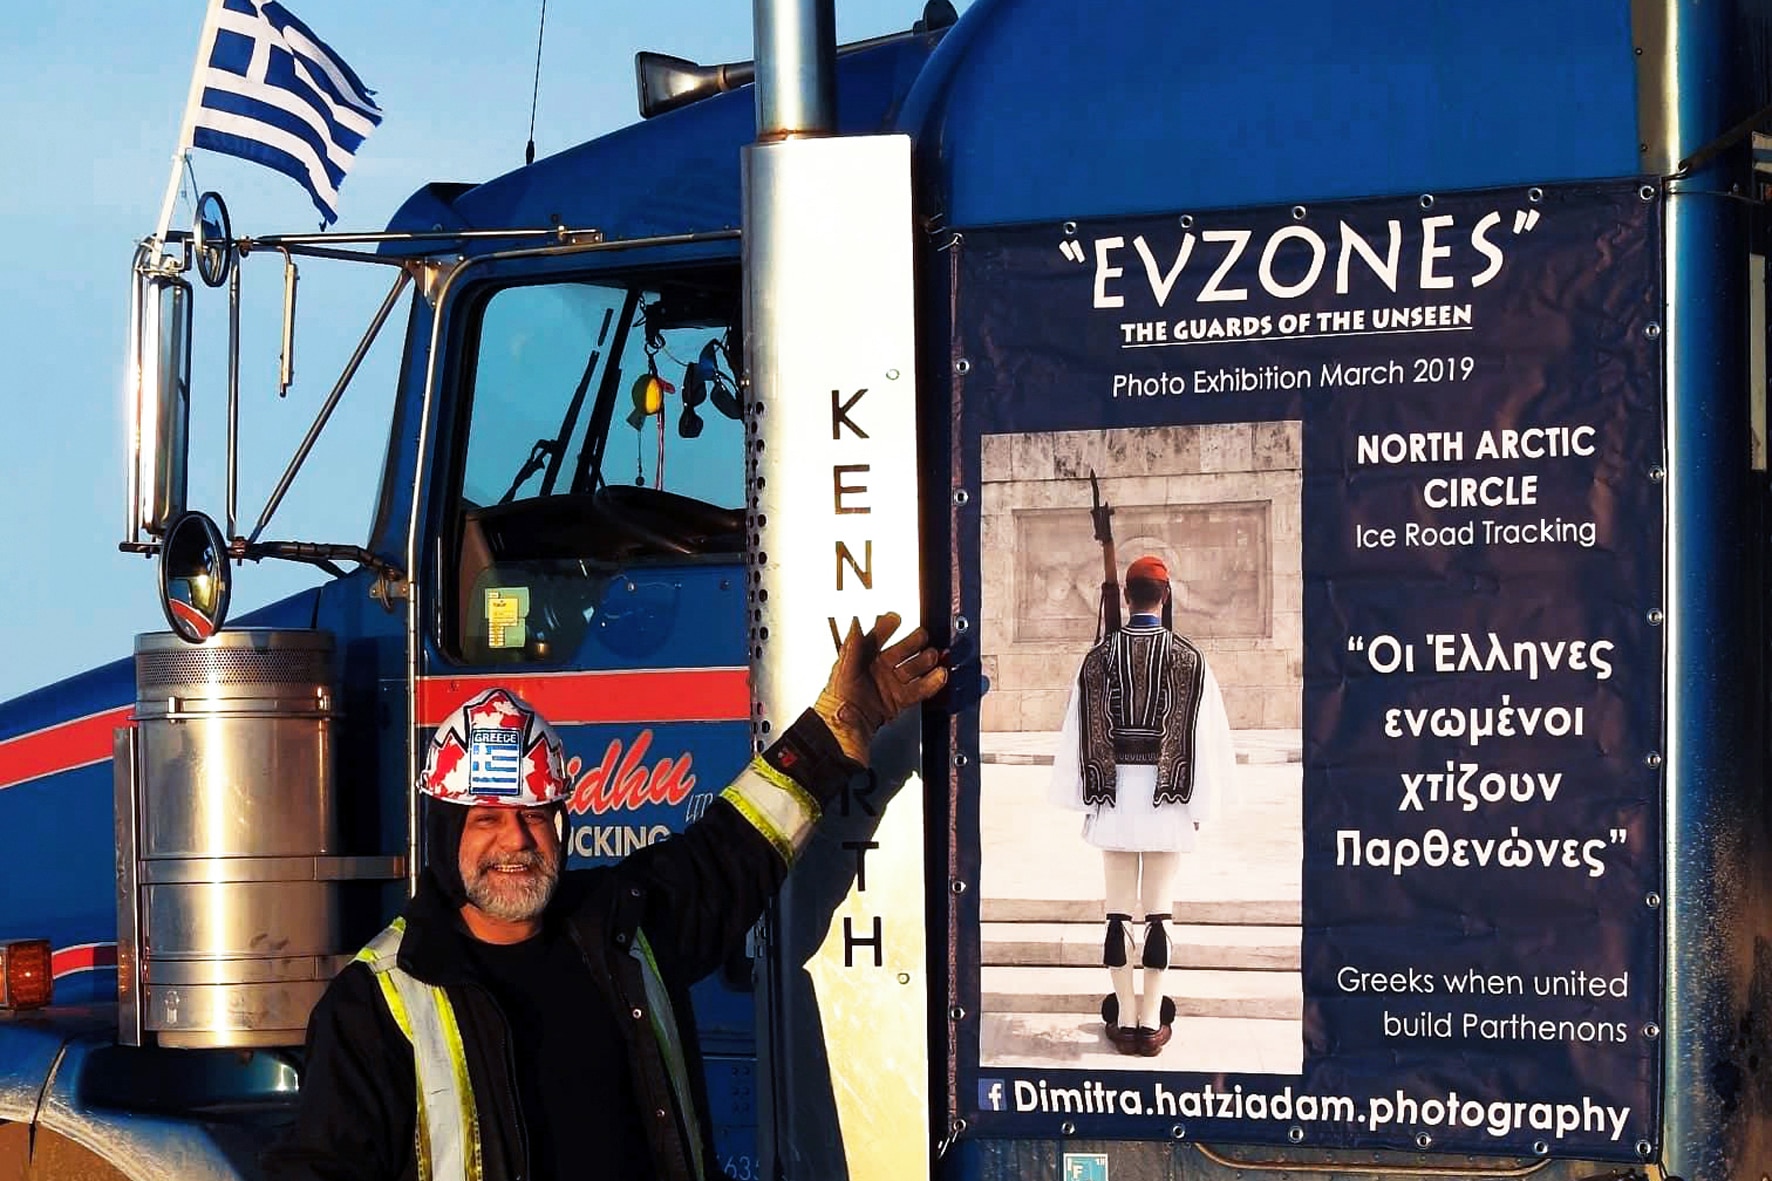 Man posing in front of poster of 'Evzones The Guards of the Unseen' exhibition